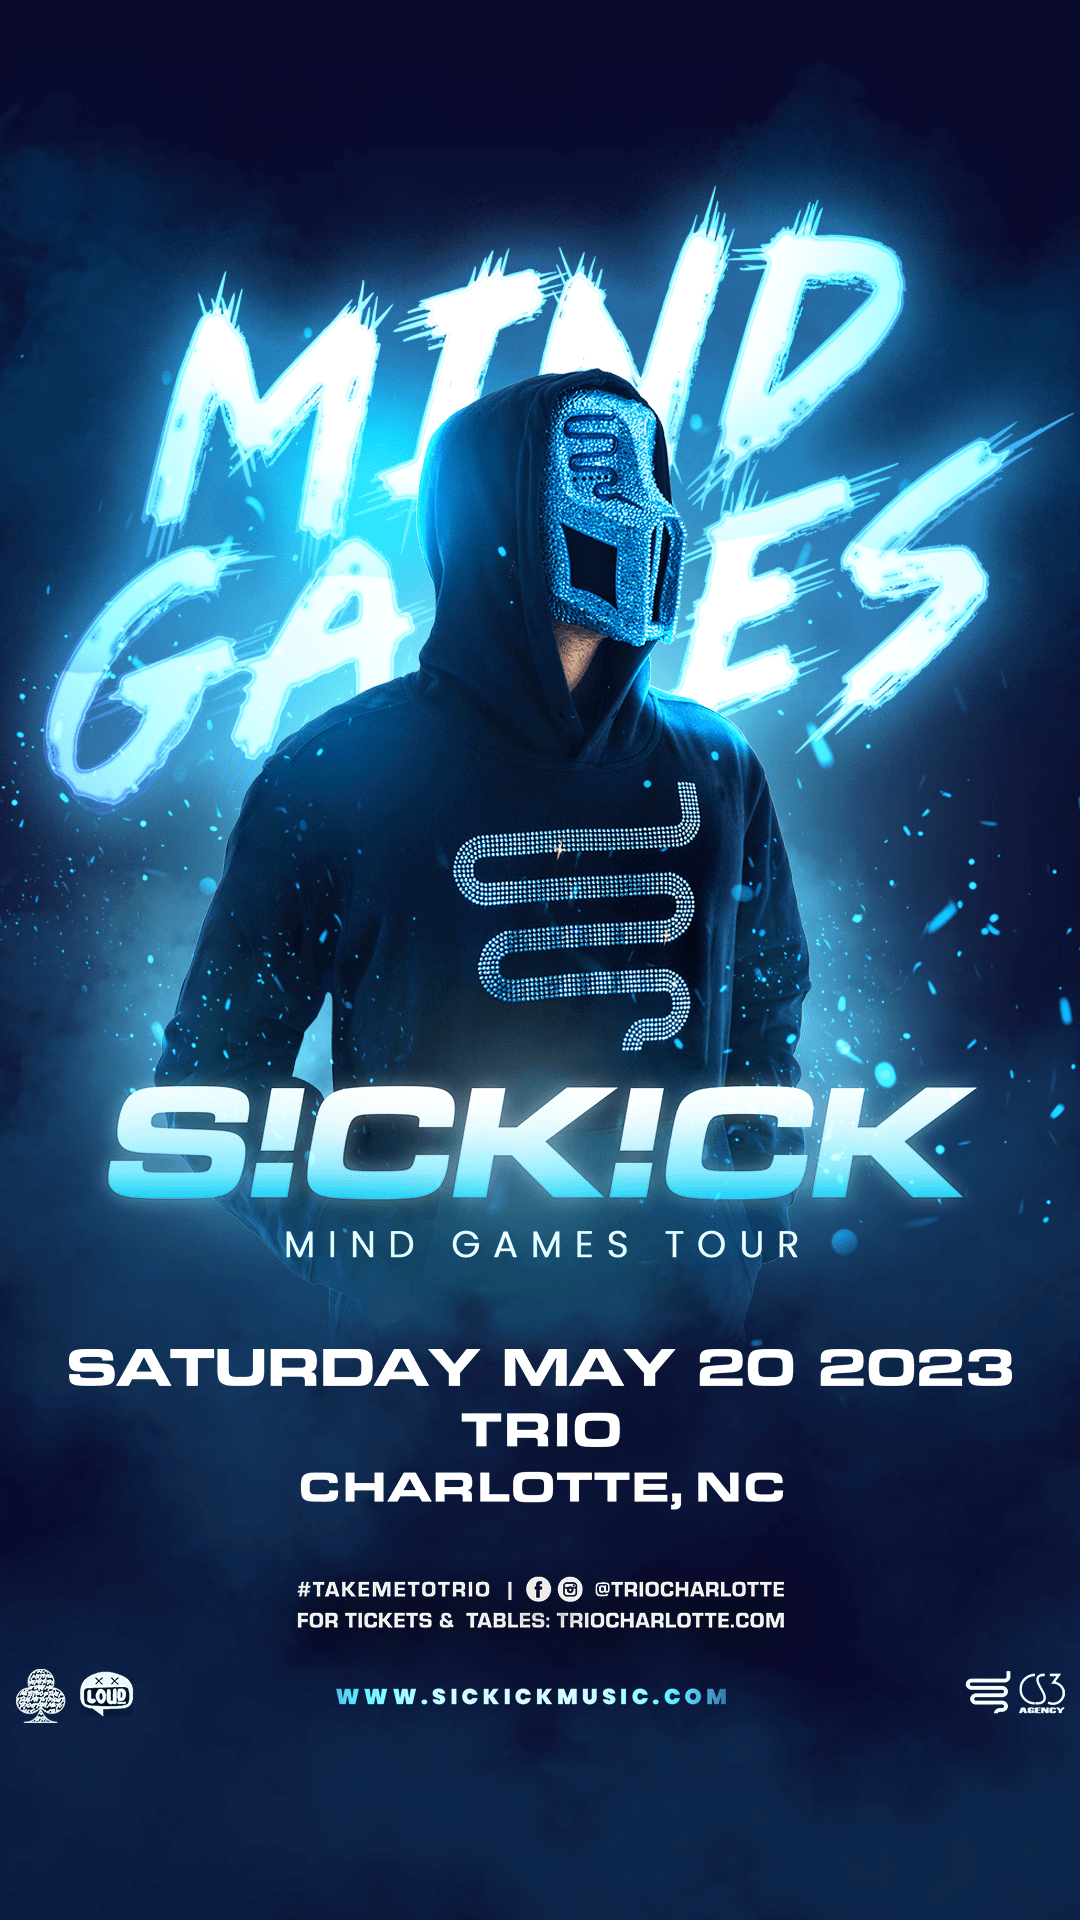 Sickick Mind Games tour Tickets at Trio Charlotte in Charlotte by Loud